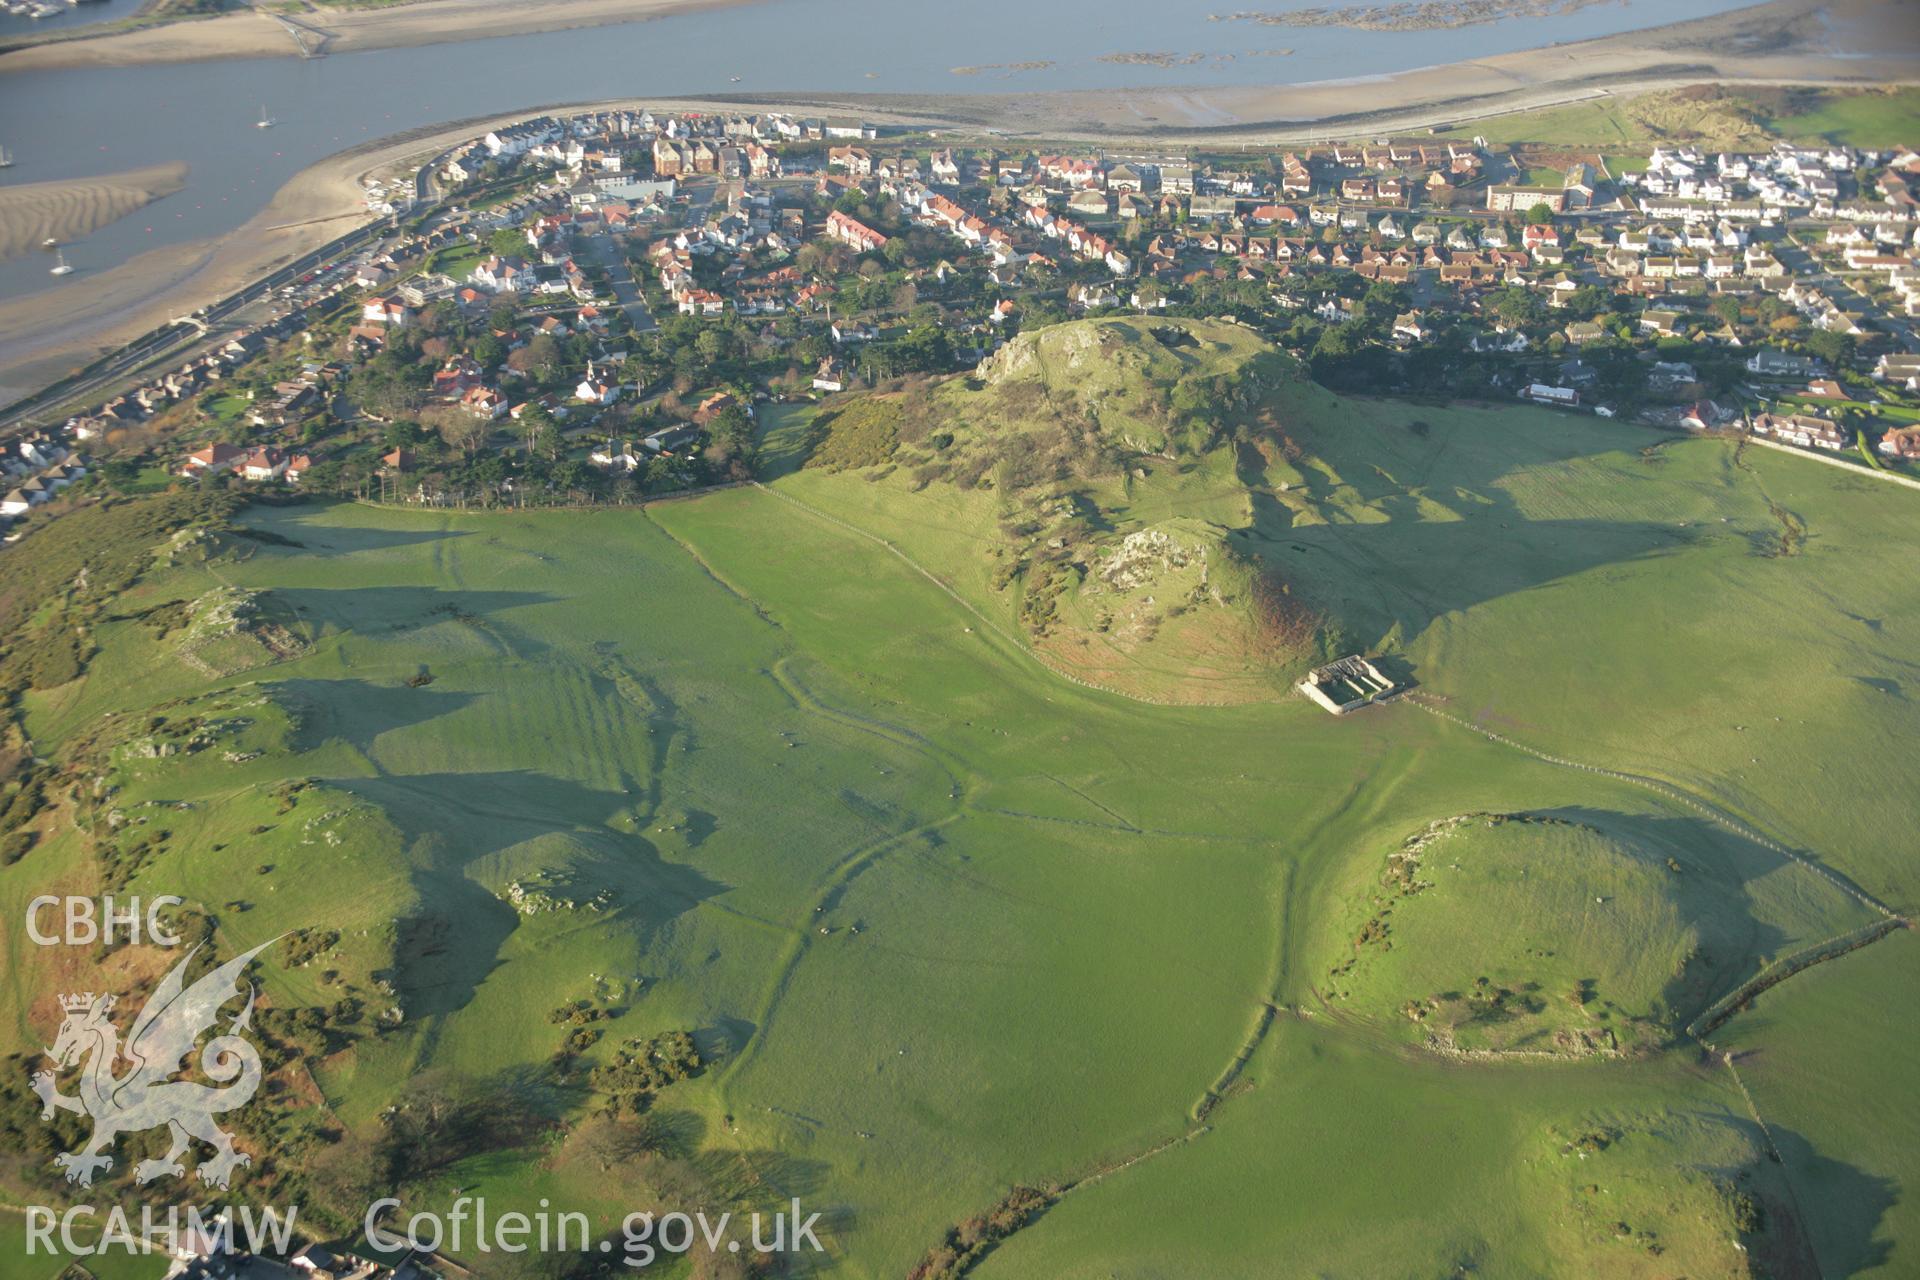 RCAHMW colour oblique aerial photograph of Deganwy Castle and of earthworks of settlement features north-east of the Castle. Taken on 25 January 2007 by Toby Driver